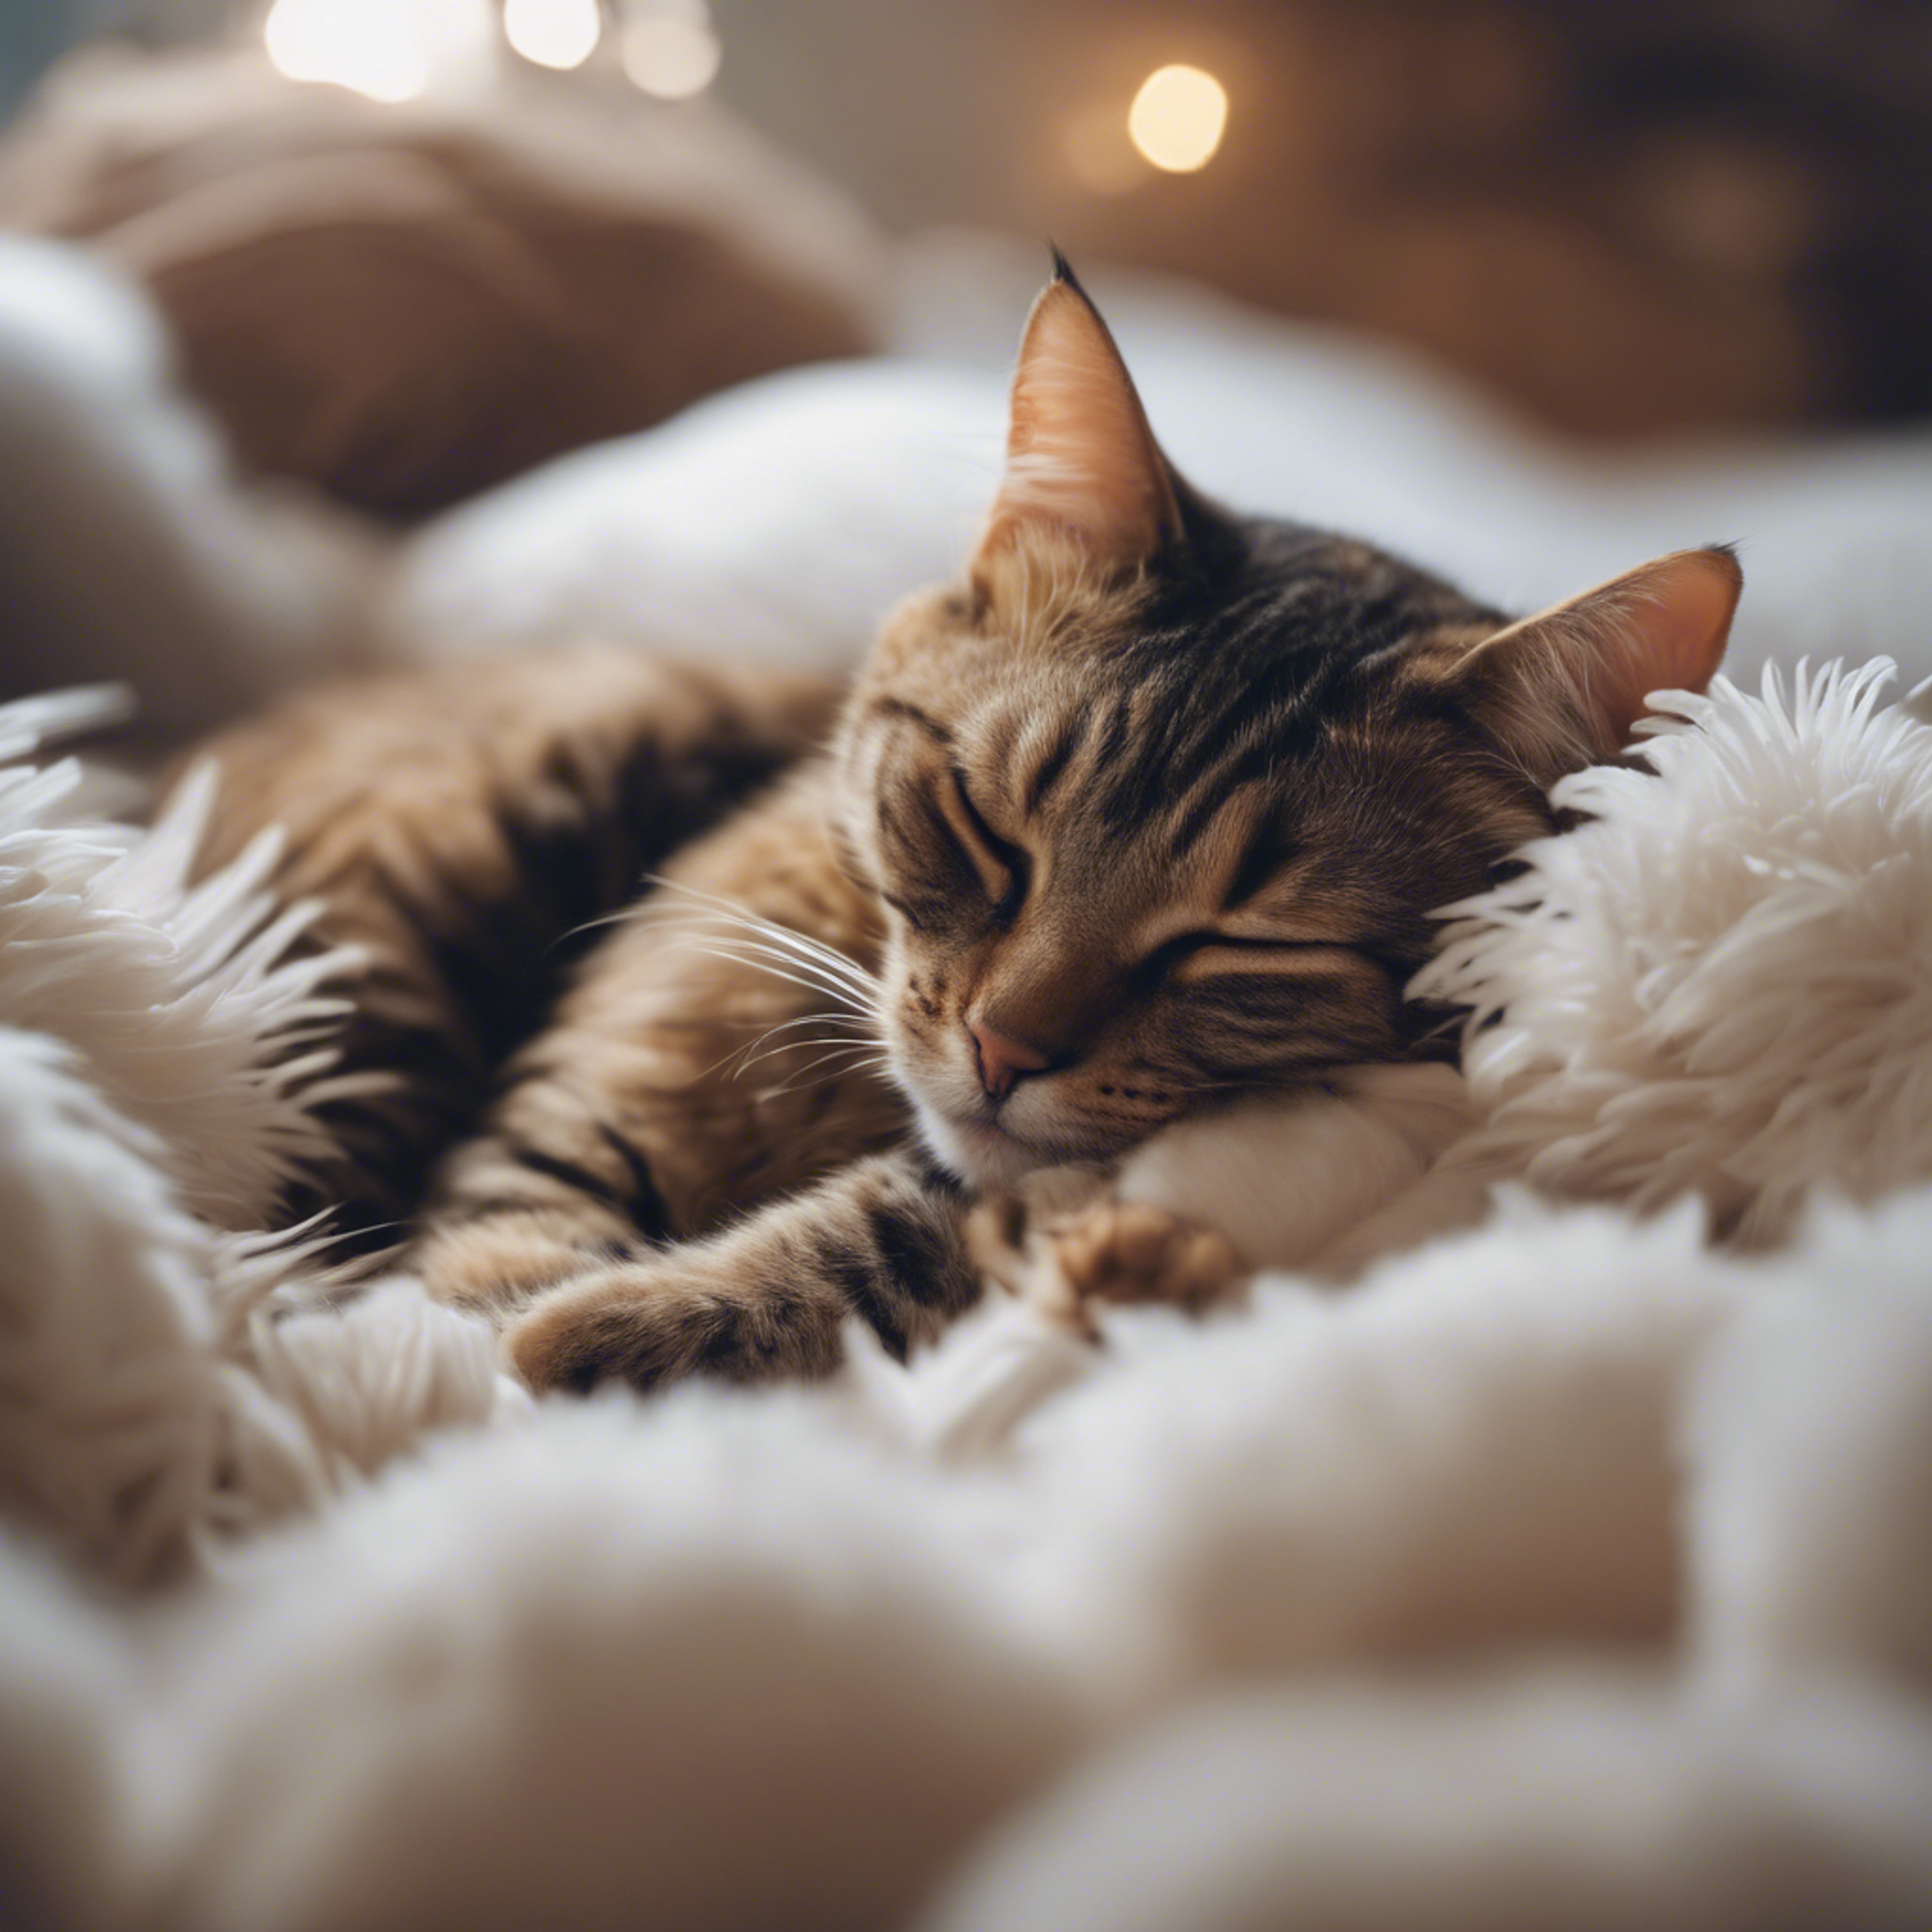 A cat sleeping soundly, completely submerged in a sea of cozy, fluffy pillows. ورق الجدران[9e78fe4df88a4e90bb06]